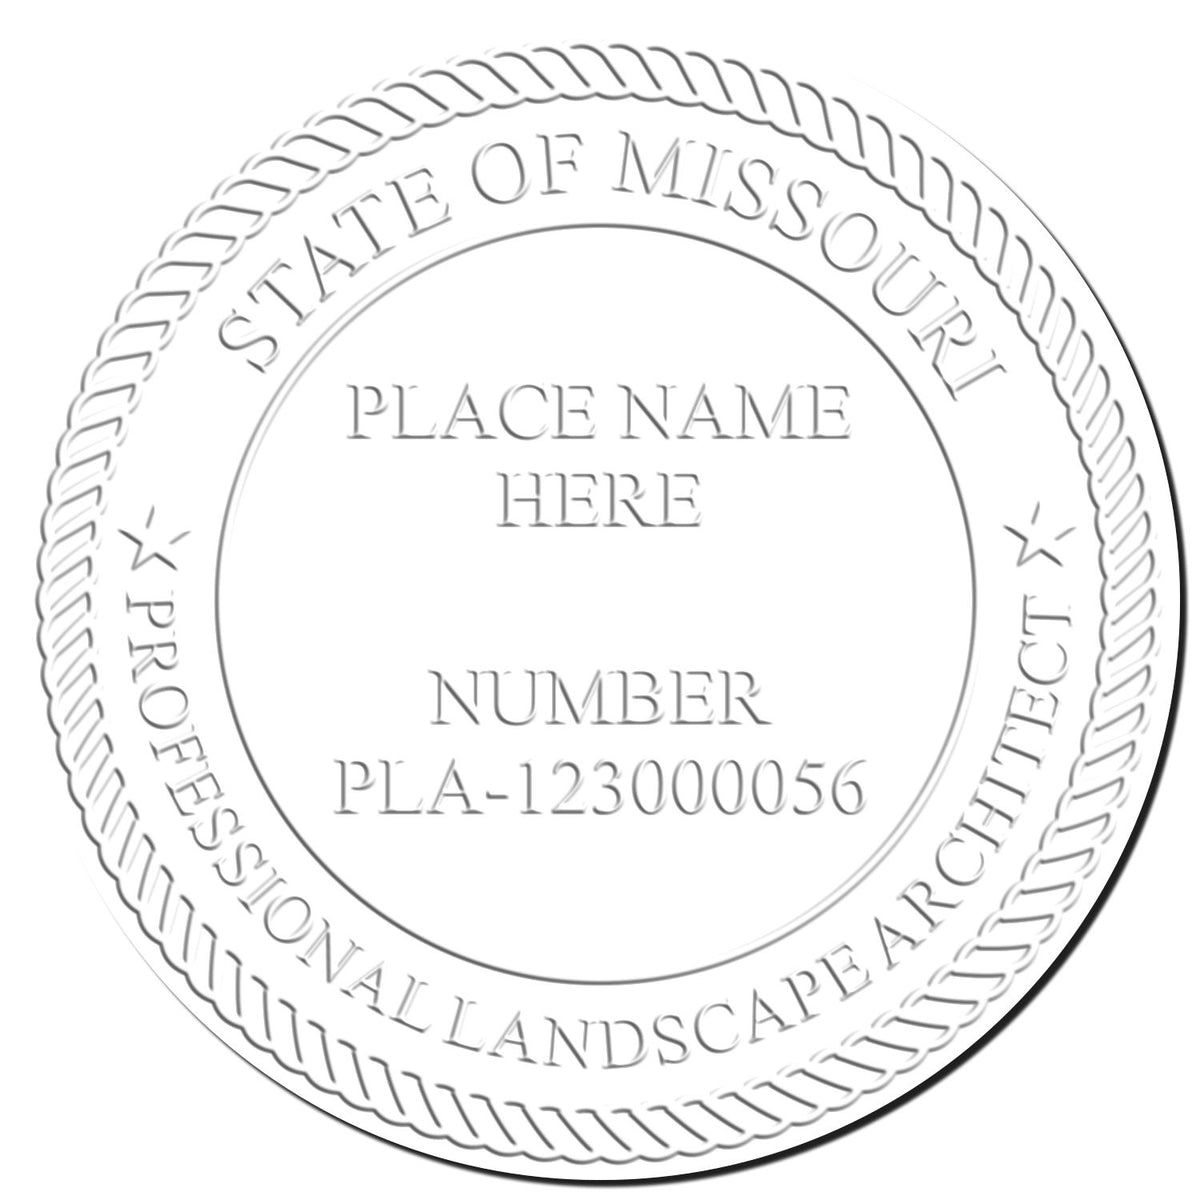 This paper is stamped with a sample imprint of the Hybrid Missouri Landscape Architect Seal, signifying its quality and reliability.